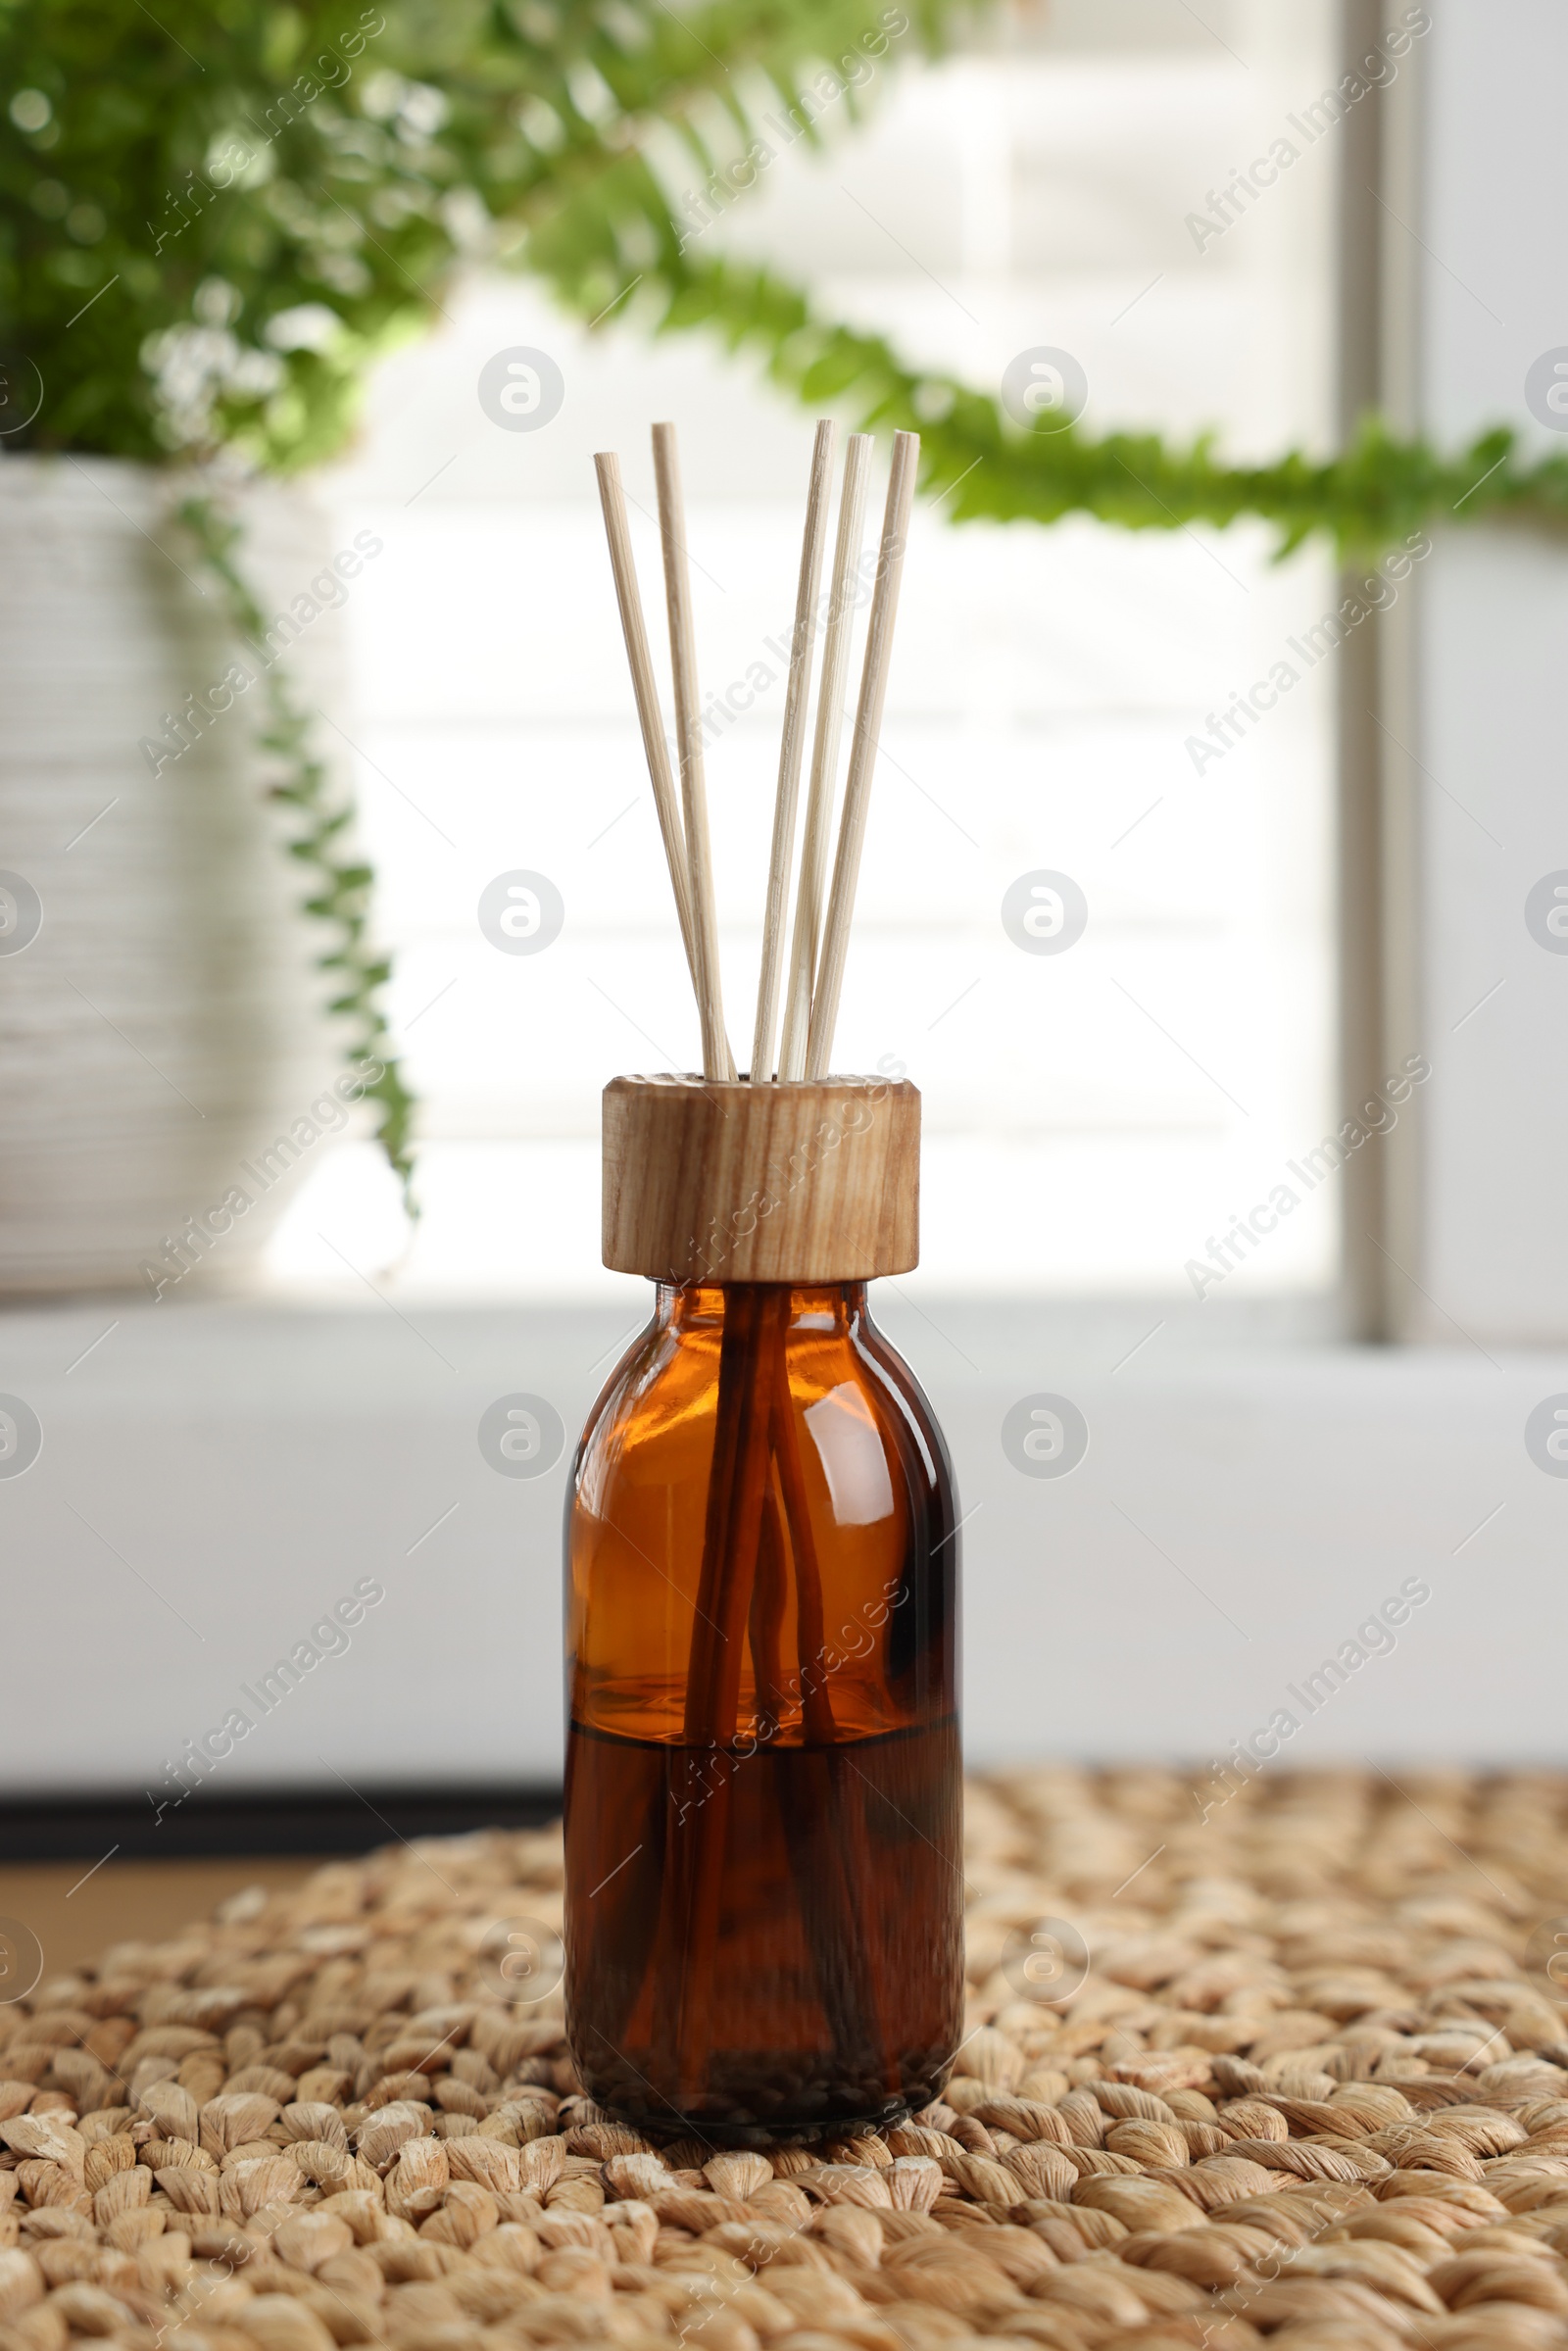 Photo of Air reed freshener and wicker mat on table indoors